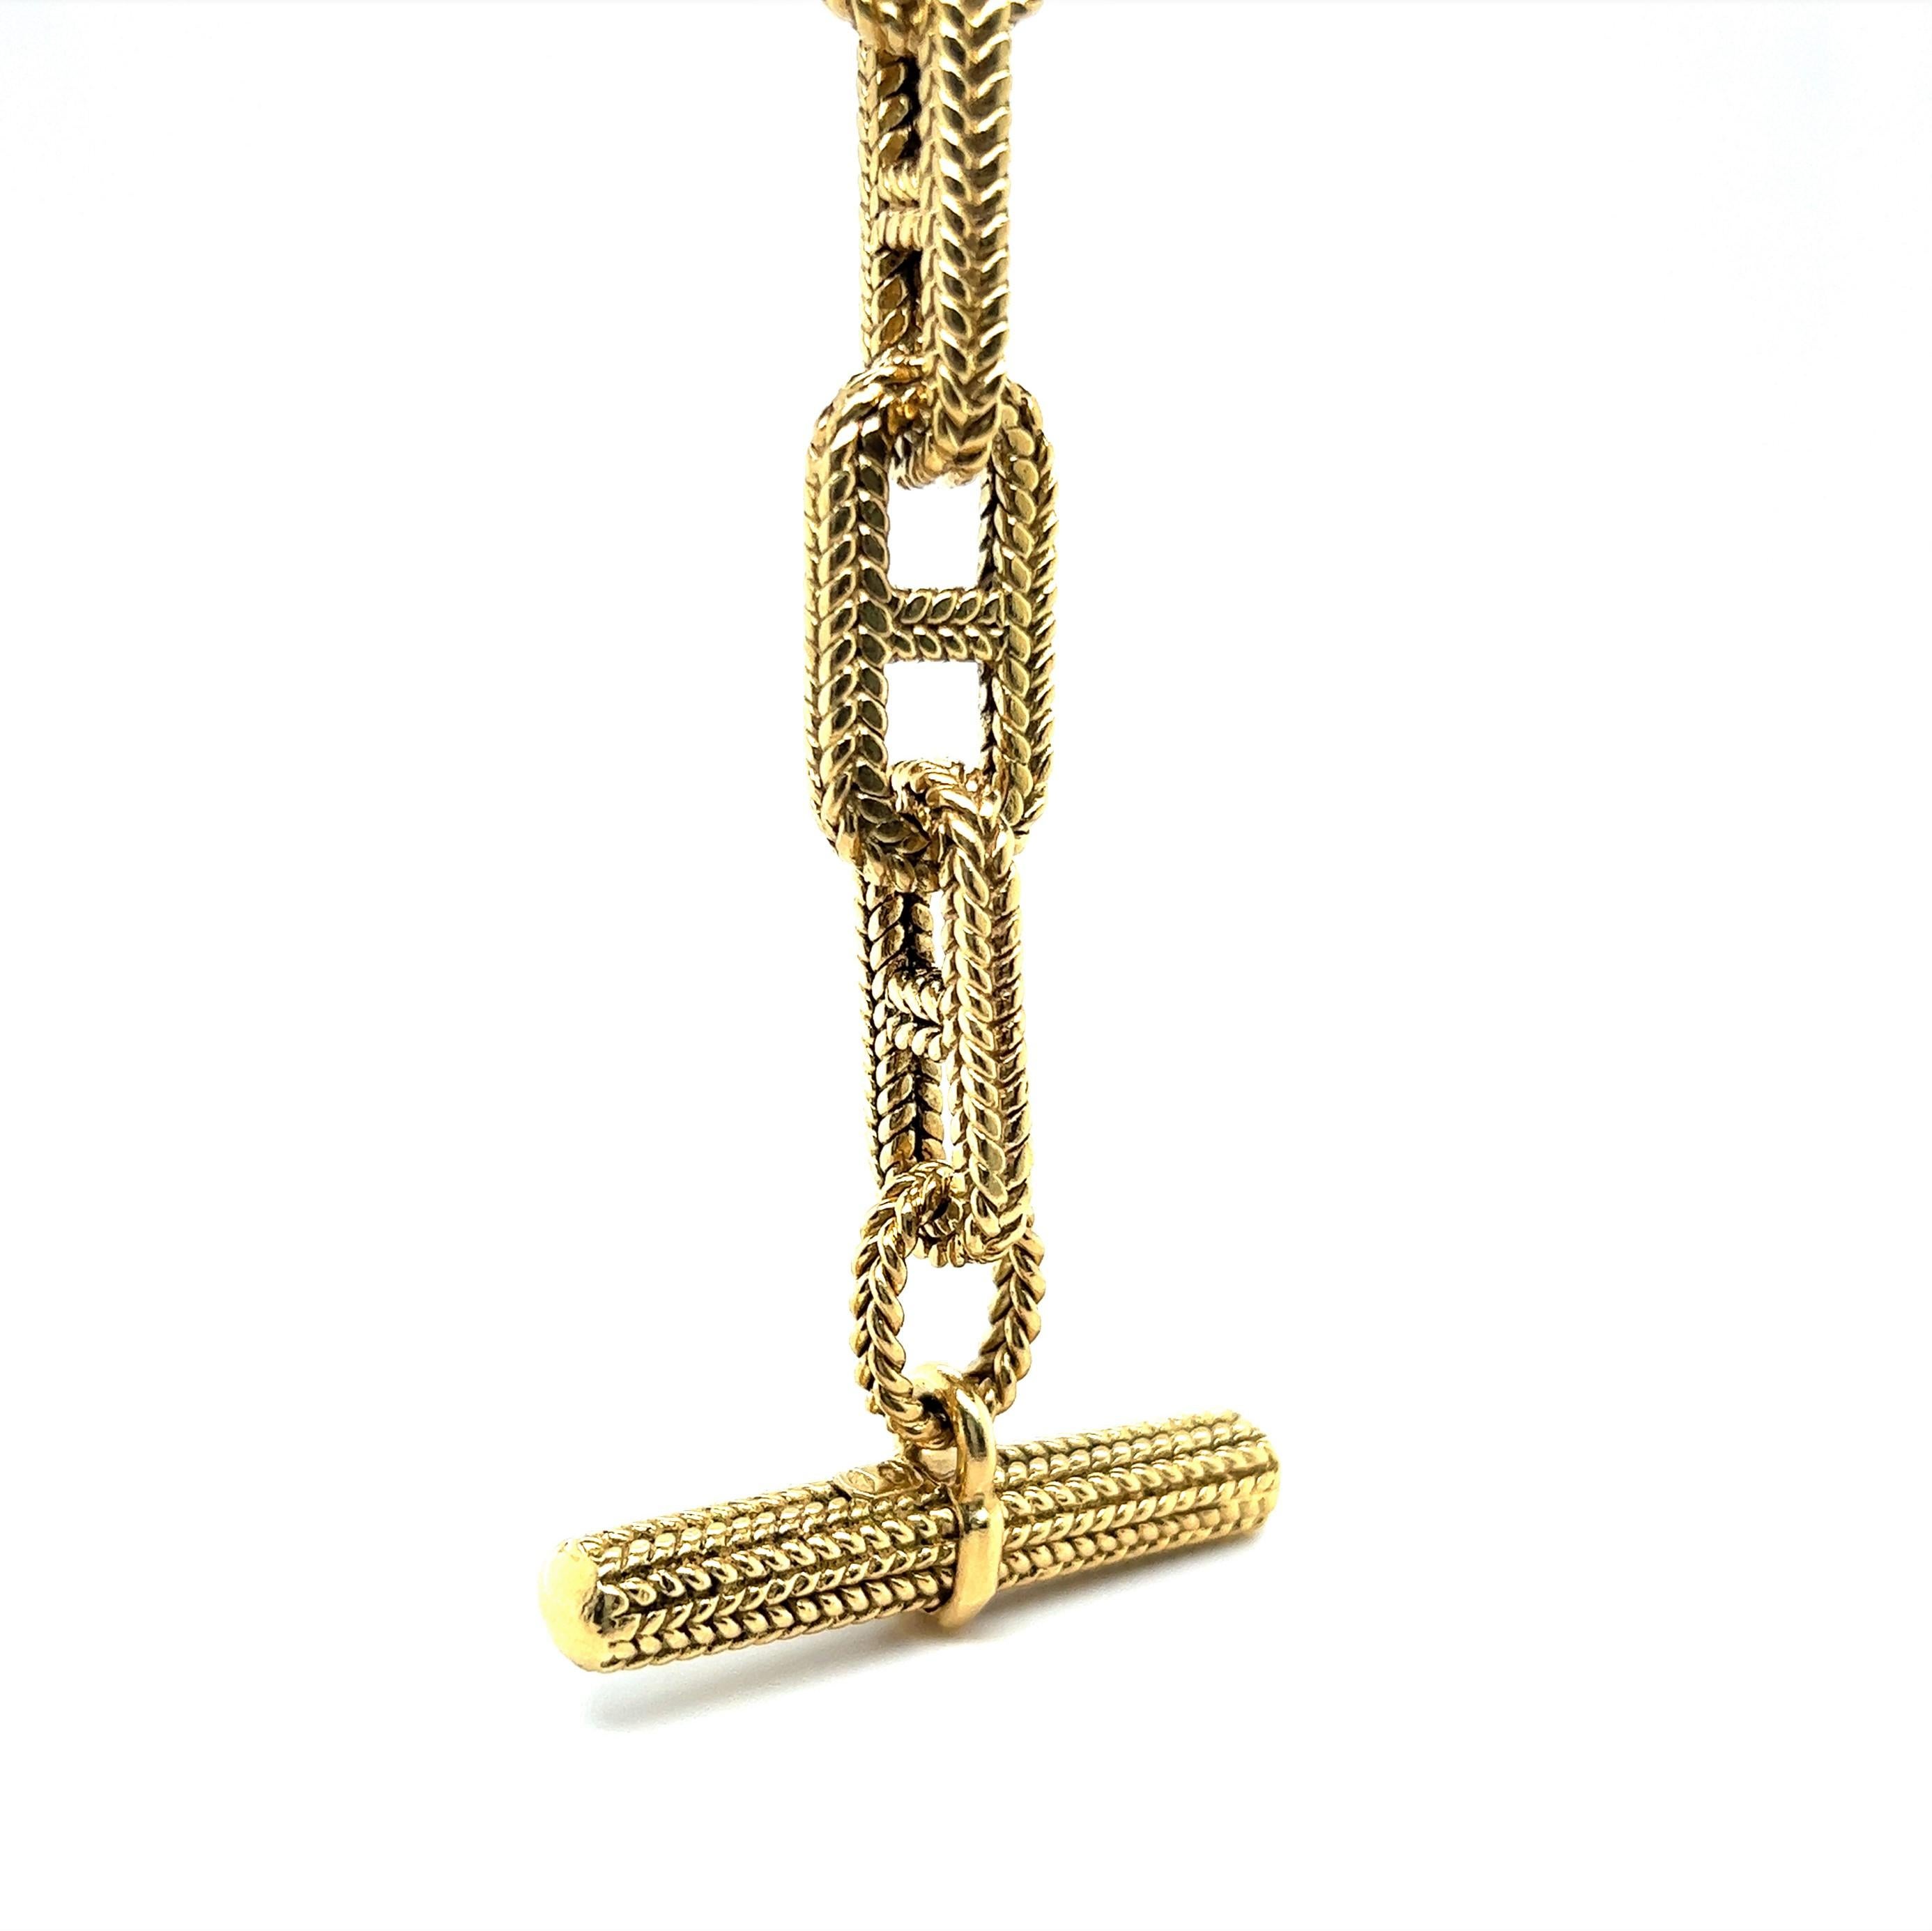 Chain Bracelet “Chaine D'ancre” in 18 Karat Yellow Gold 3